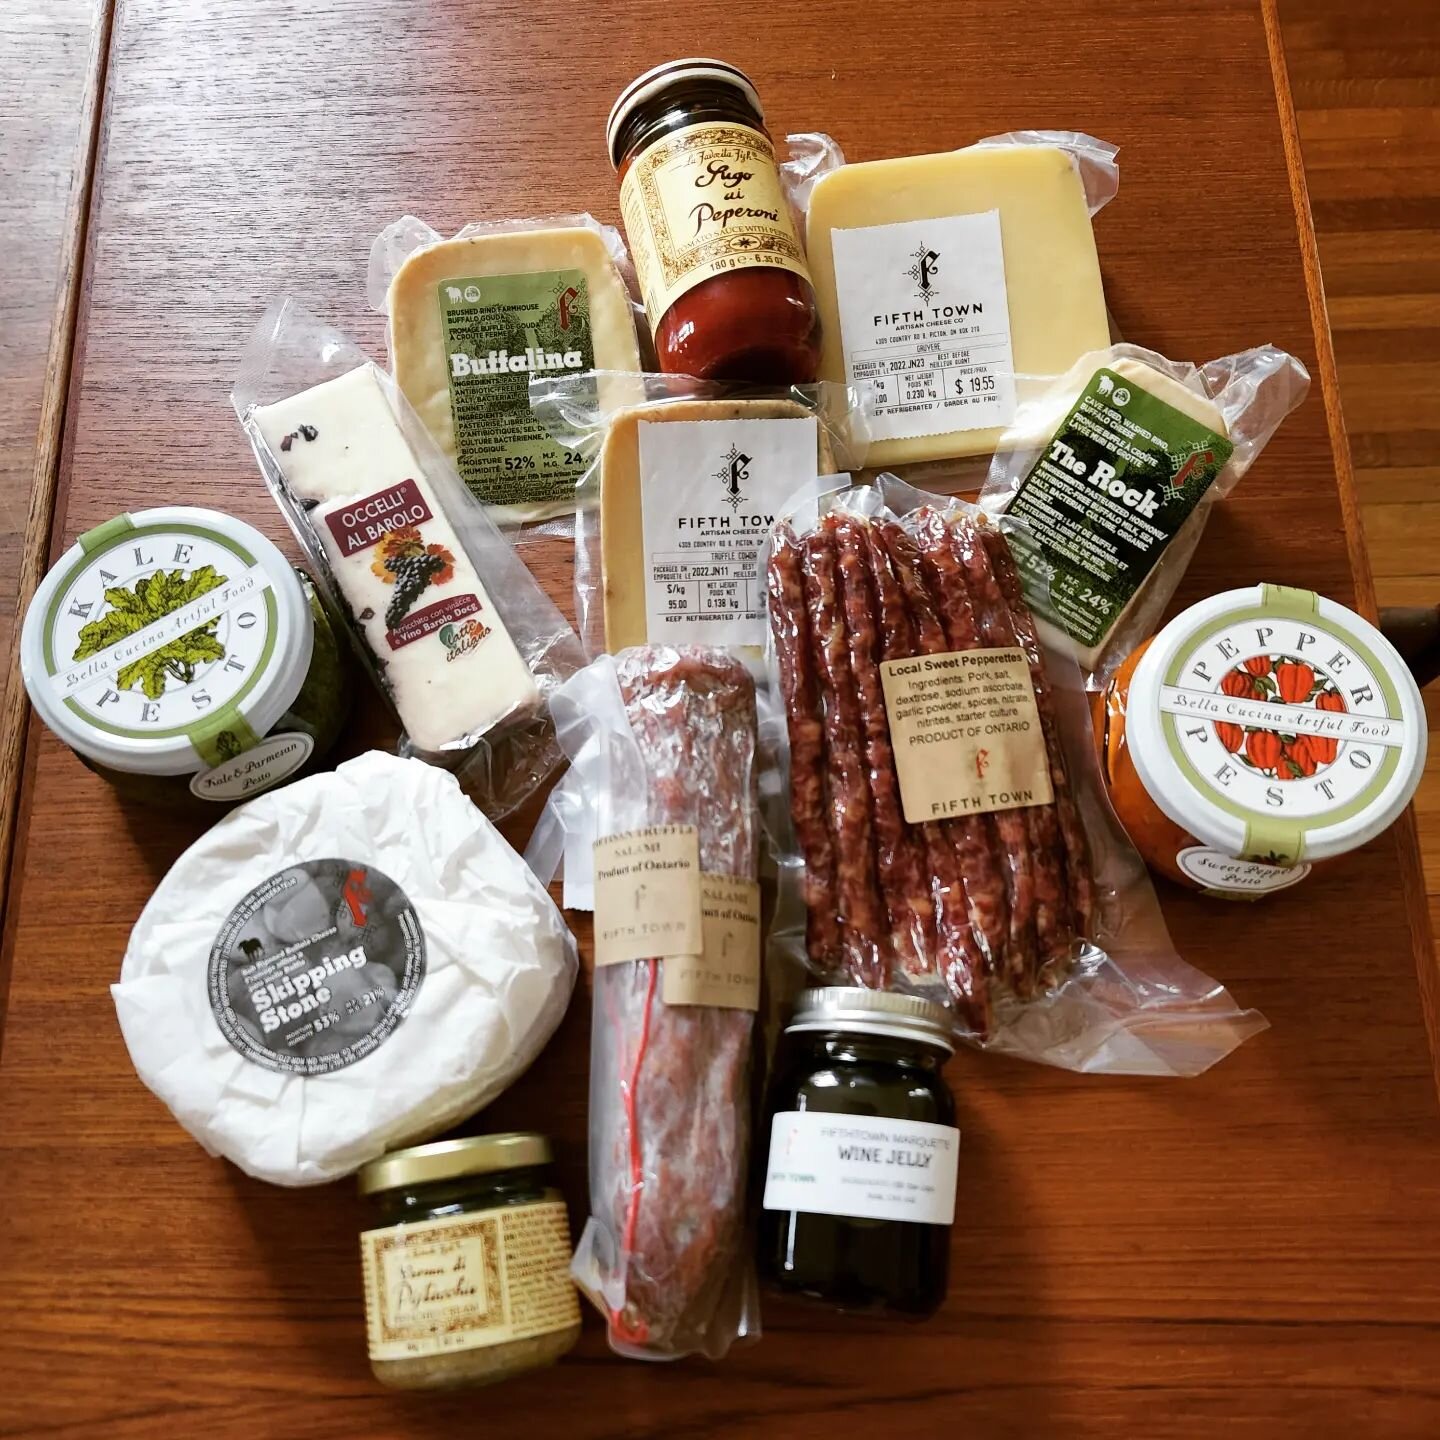 What a haul of tasty items from @fifthtownartisancheese.  Cheeses, meats, and jams, oh my. 

The perfect stop when preparing a charcuterie board to enjoy in our beautiful side garden.

#theredbricksuites #theredbricksuitesnapanee #rto9 #cheeselover #